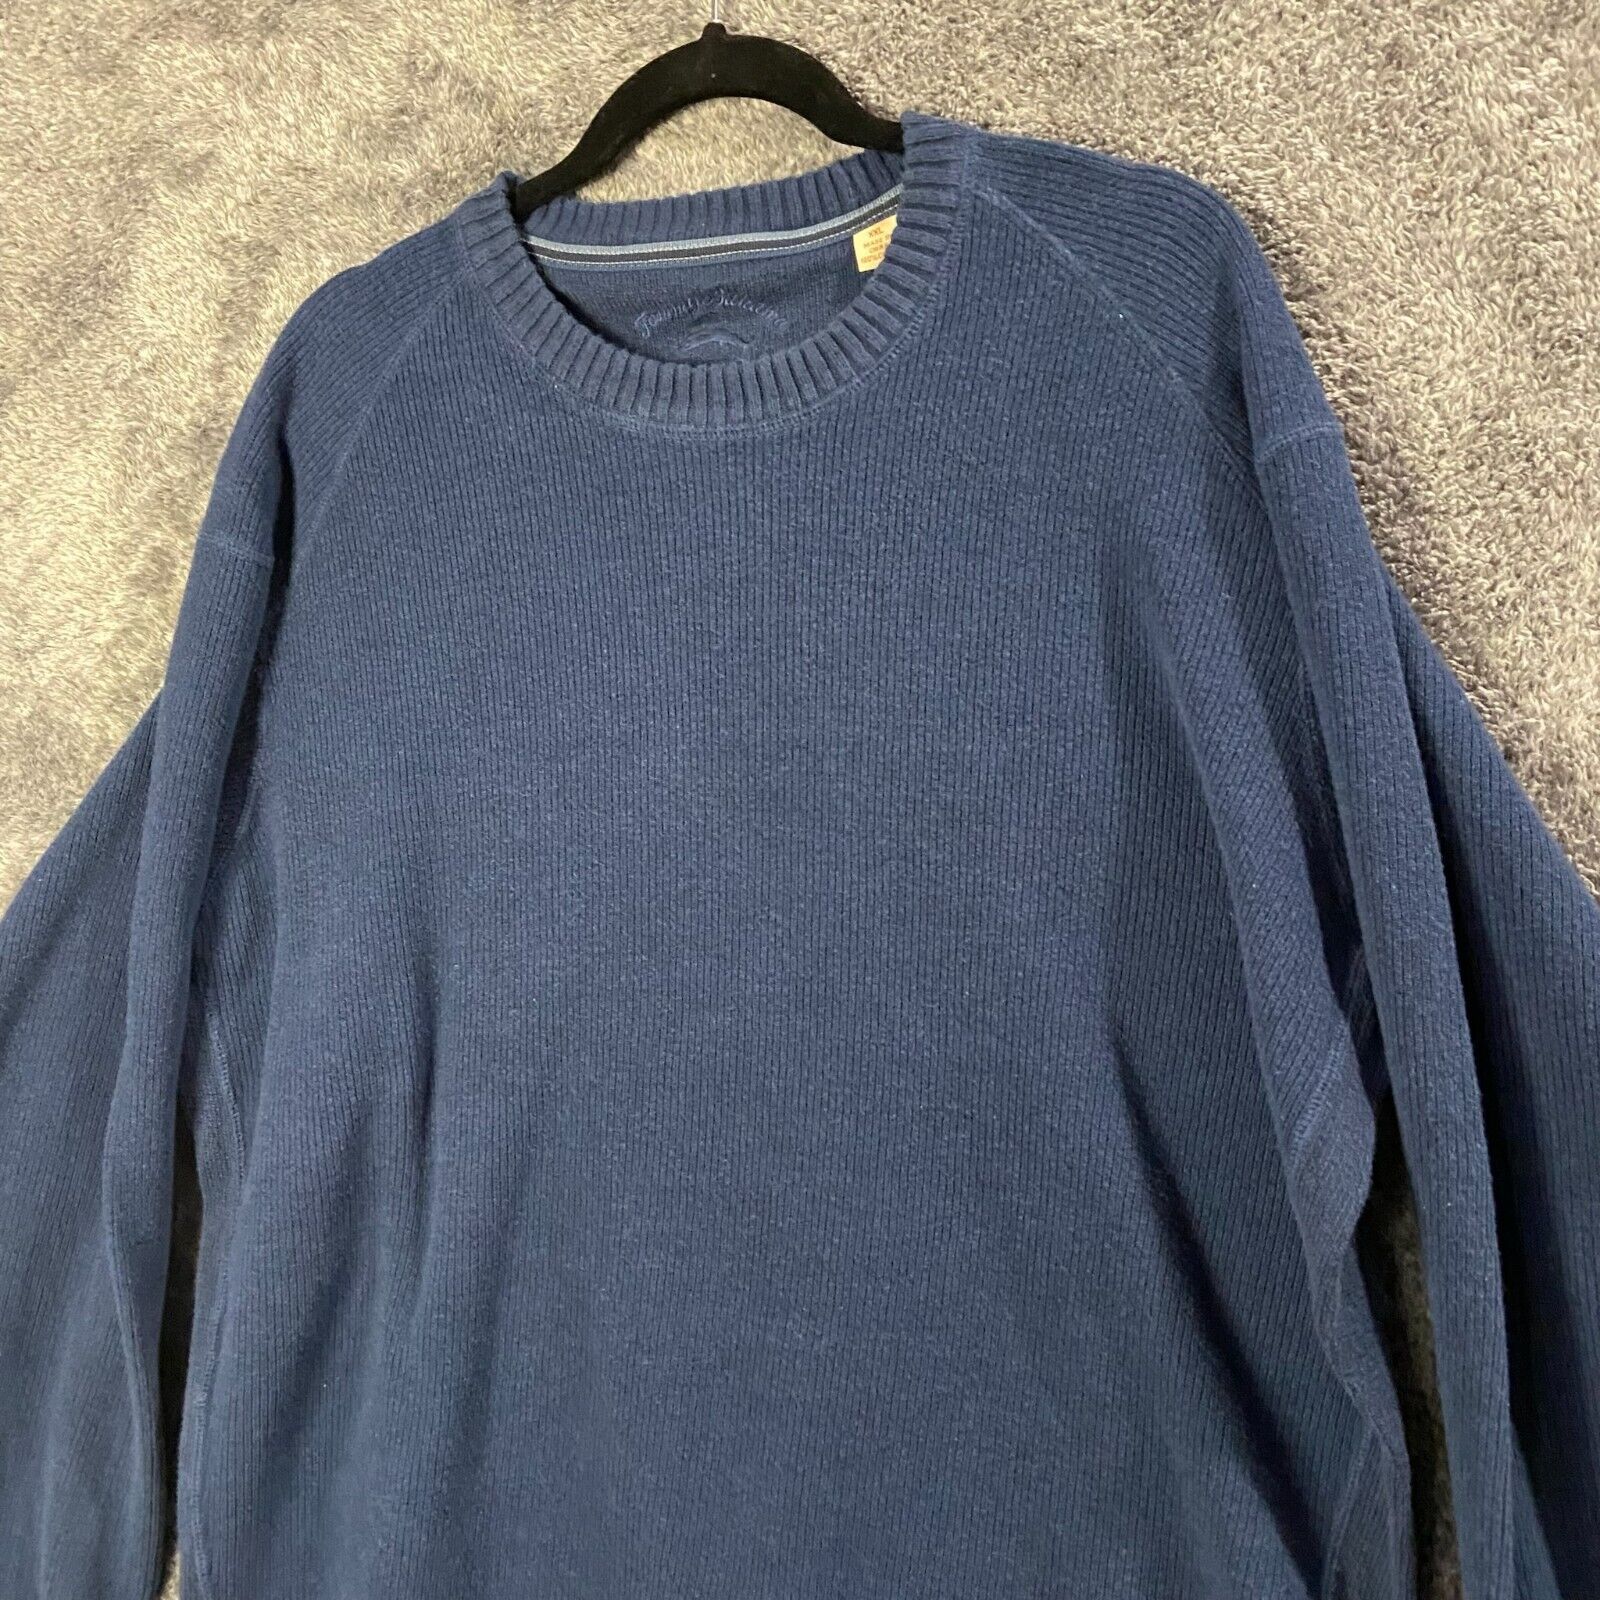 Primary image for Tommy Bahama Sweater Mens 2XL XXL Navy Blue Pullover Ribbed Crewneck Cozy Knit